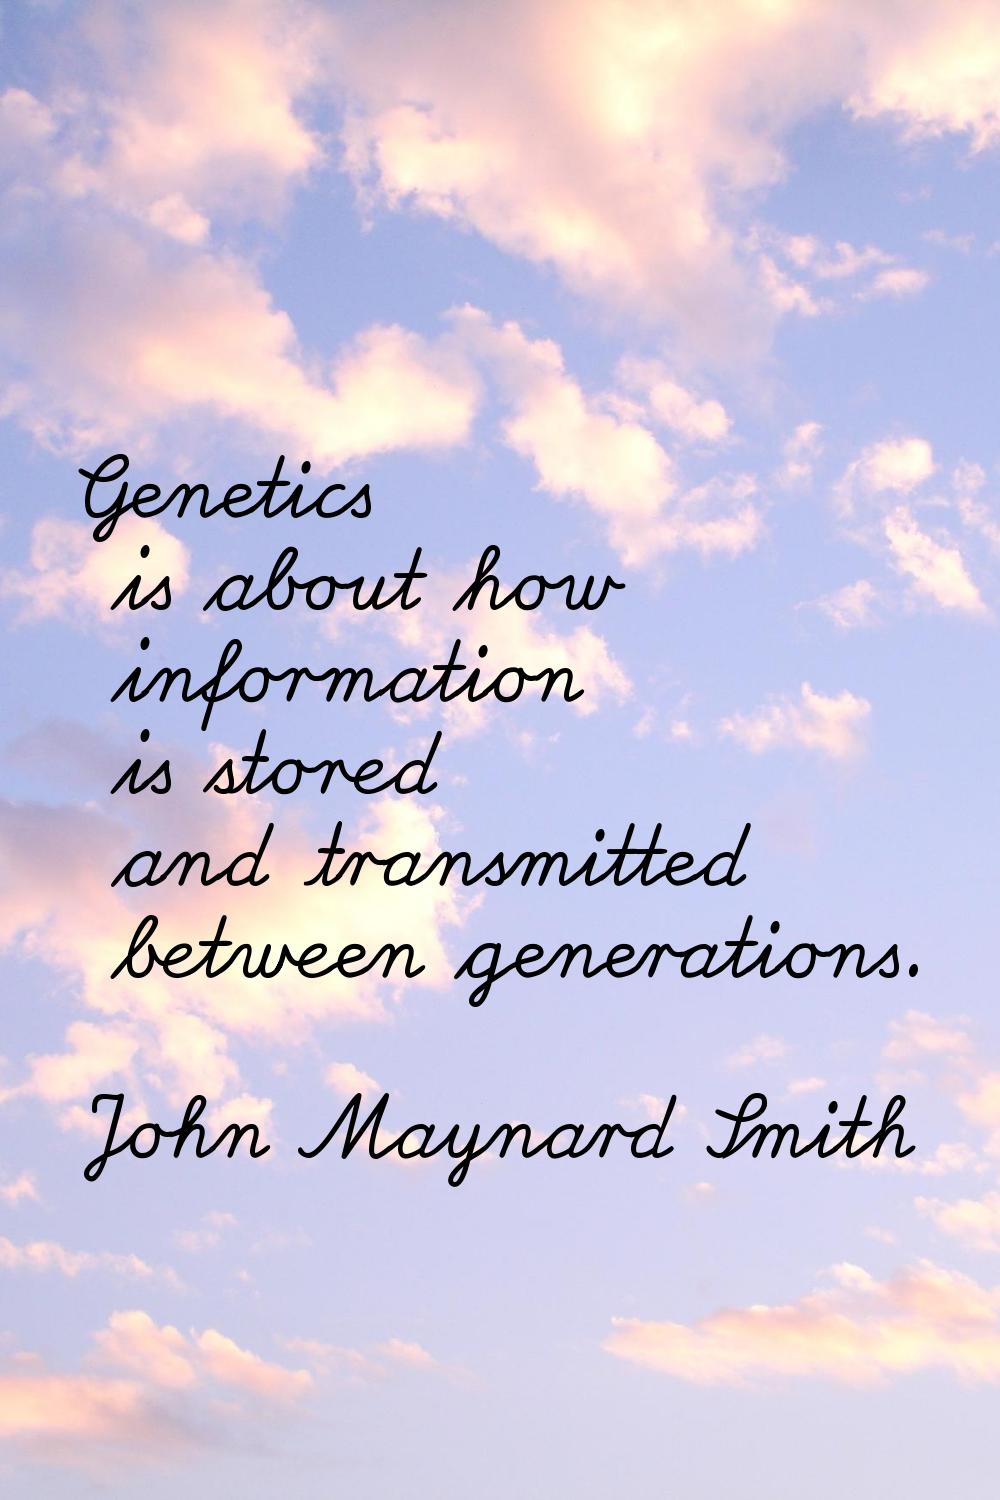 Genetics is about how information is stored and transmitted between generations.